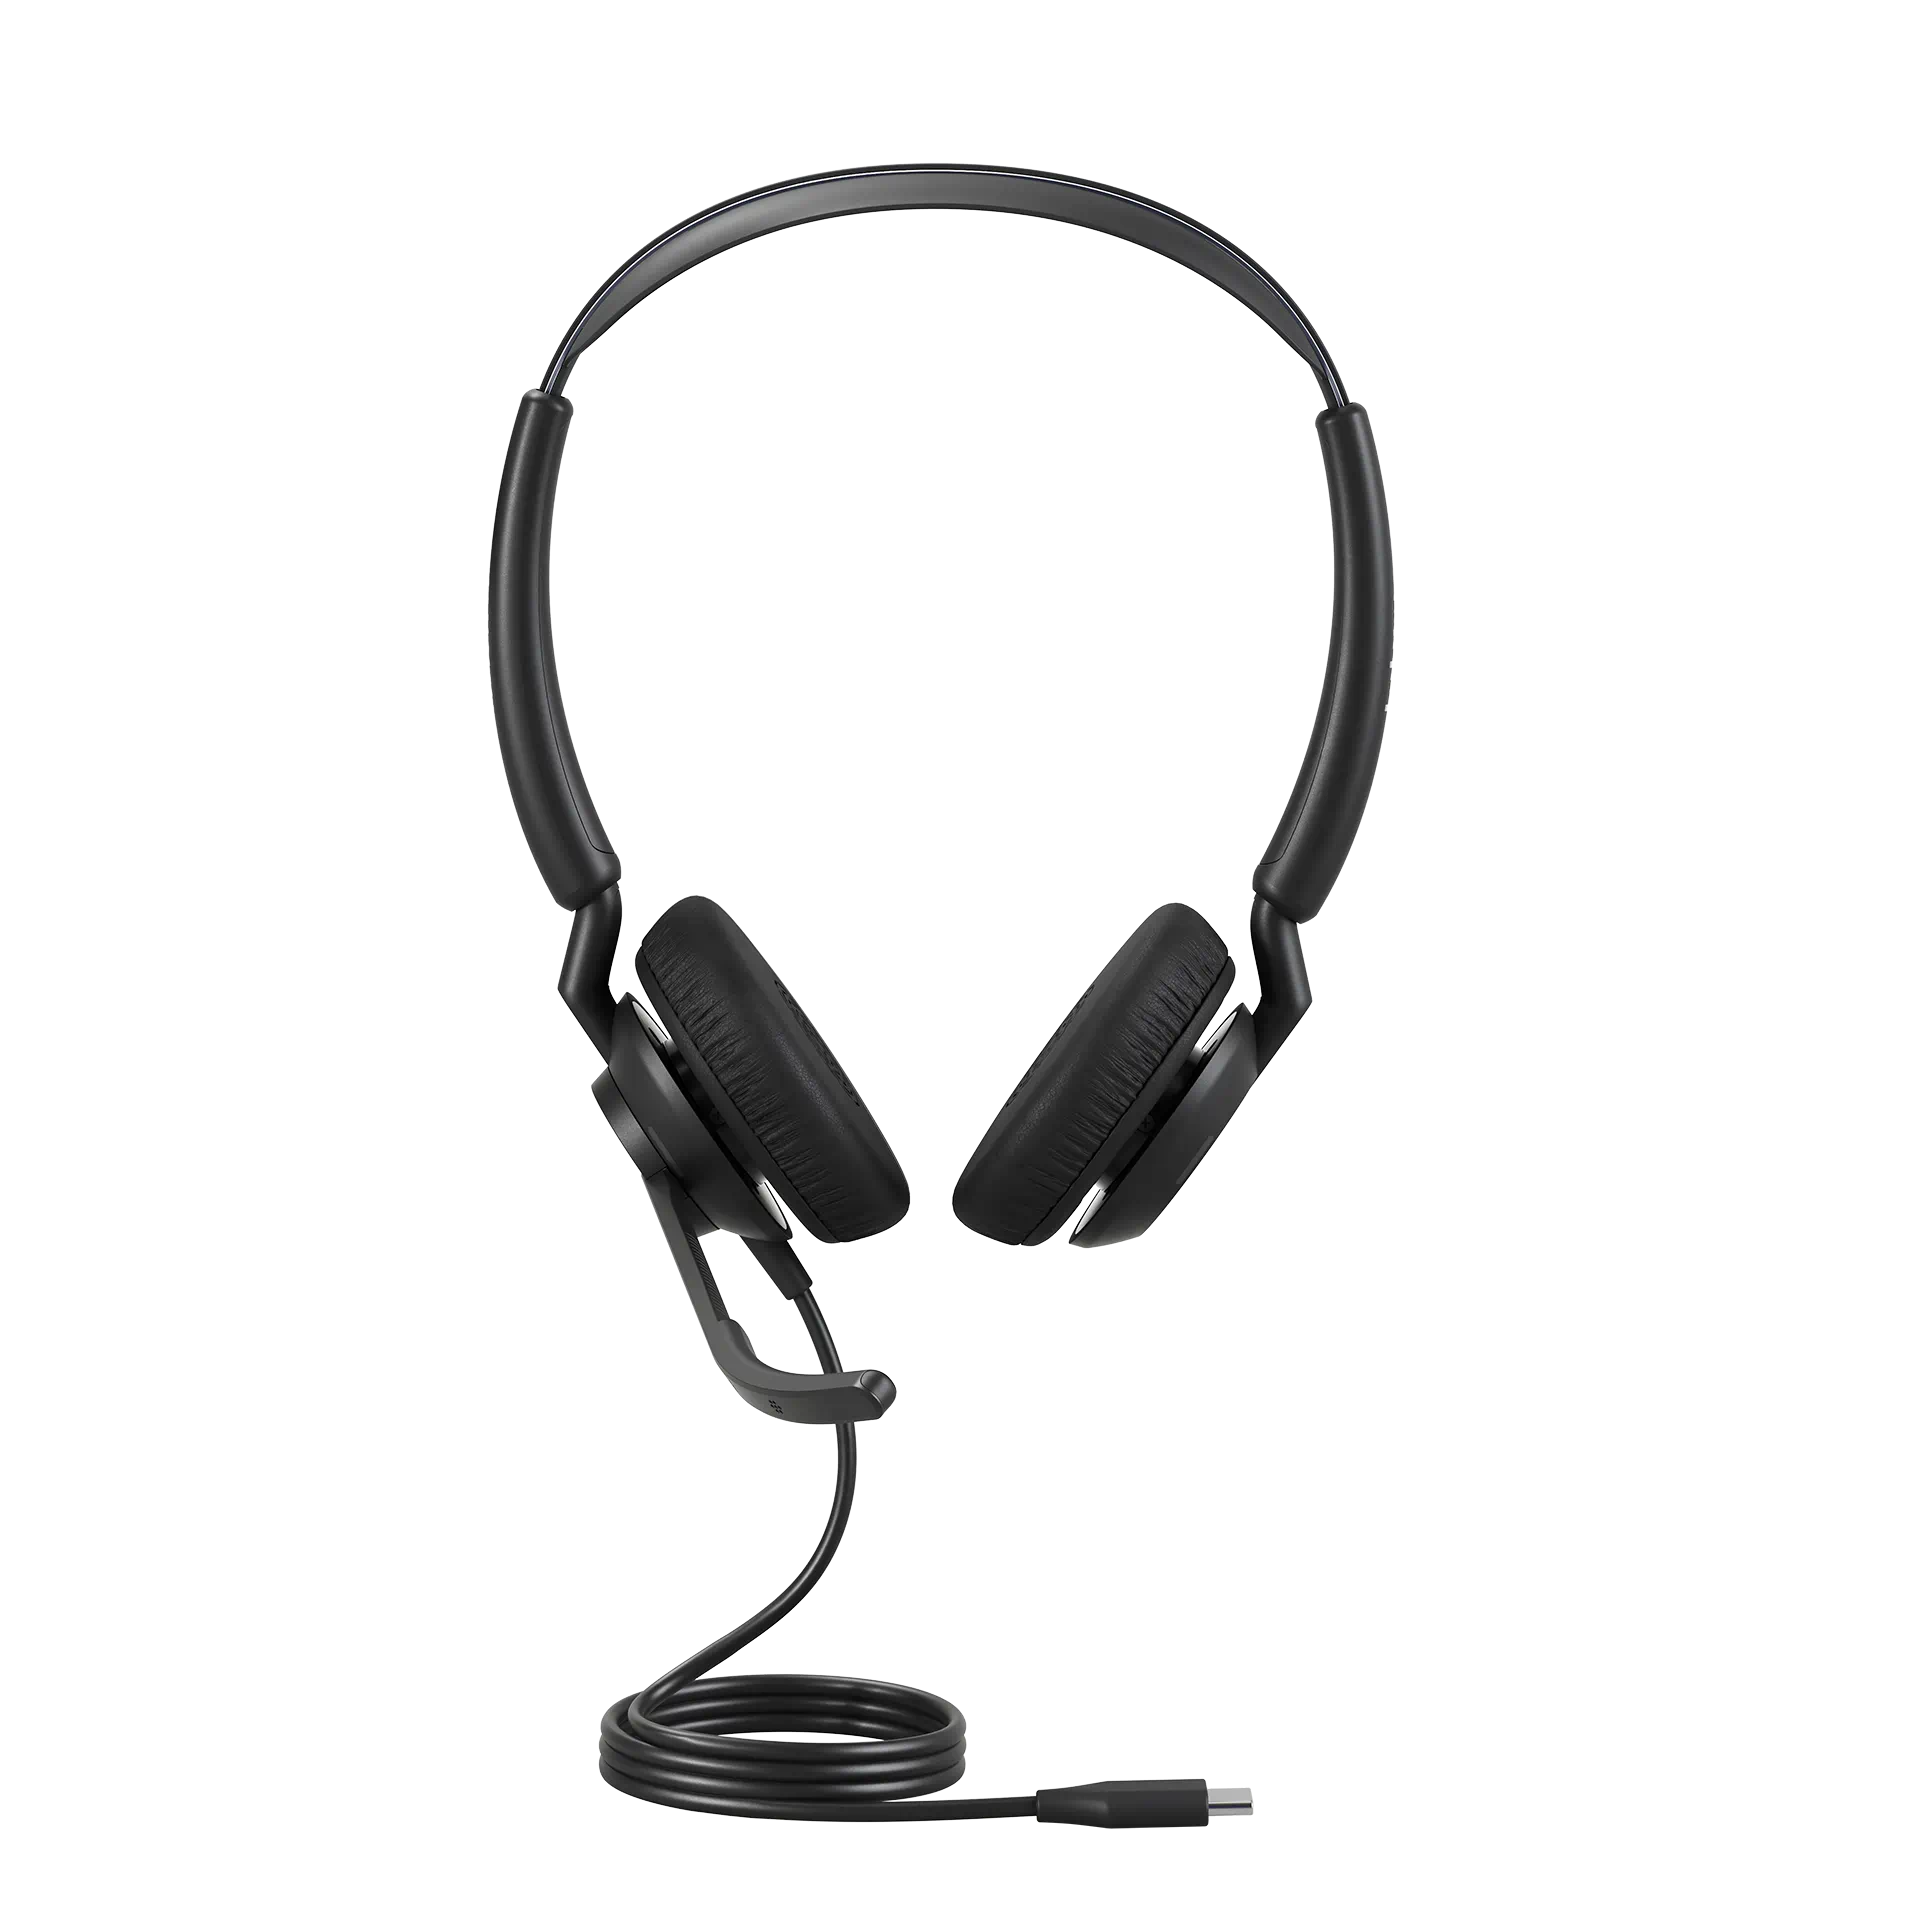 The best headset for clear customer calls | Jabra Engage 50 II